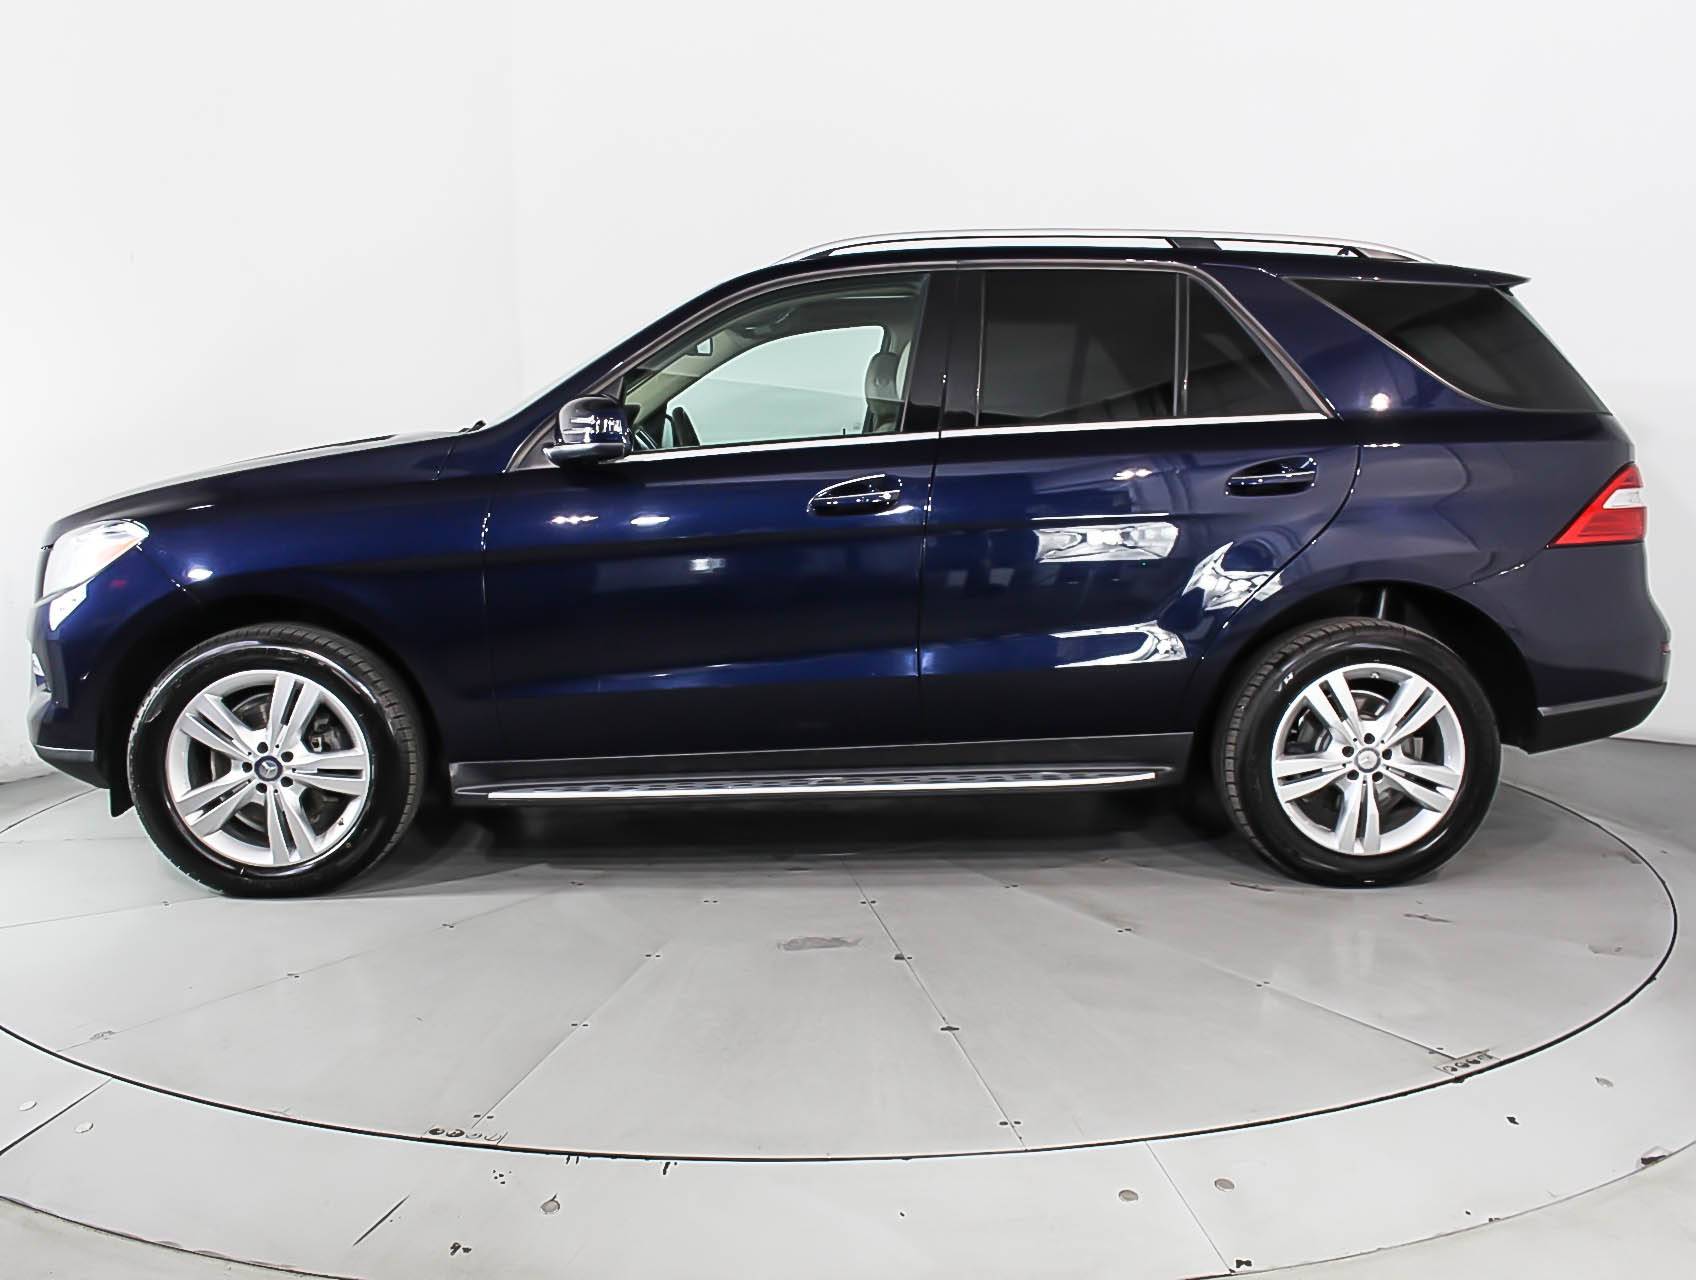 Florida Fine Cars - Used MERCEDES-BENZ M CLASS 2014 WEST PALM ML350